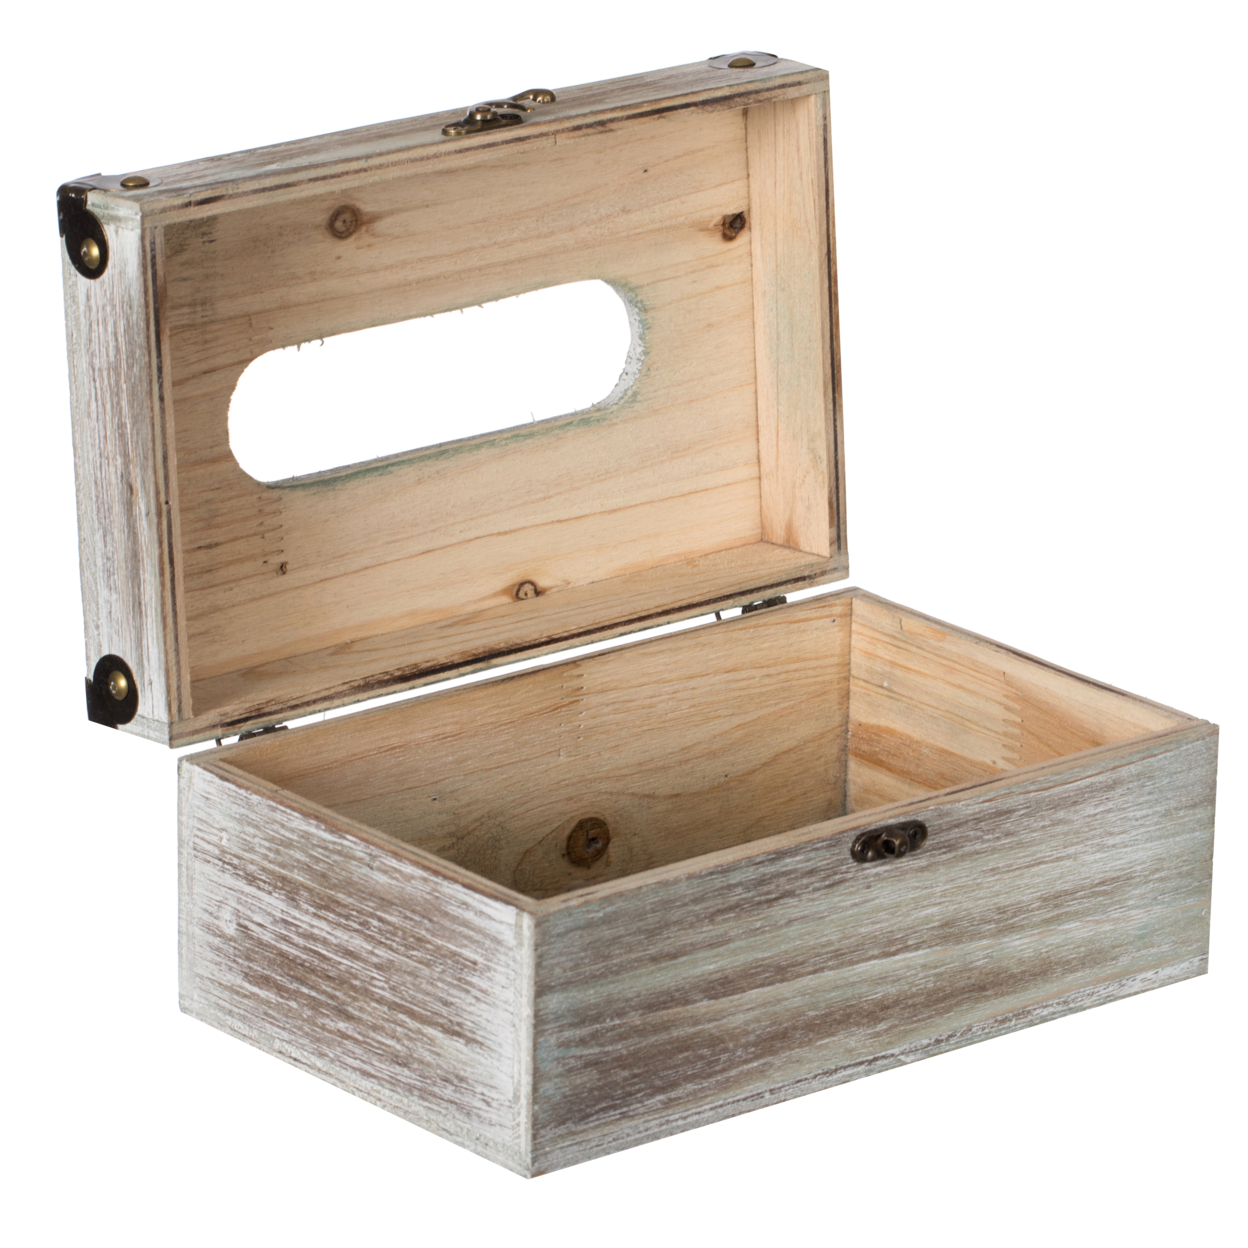 Grey Wood Facial Tissue Box Holder For Your Bathroom, Office, Or Vanity With Decorative Metal Brackets